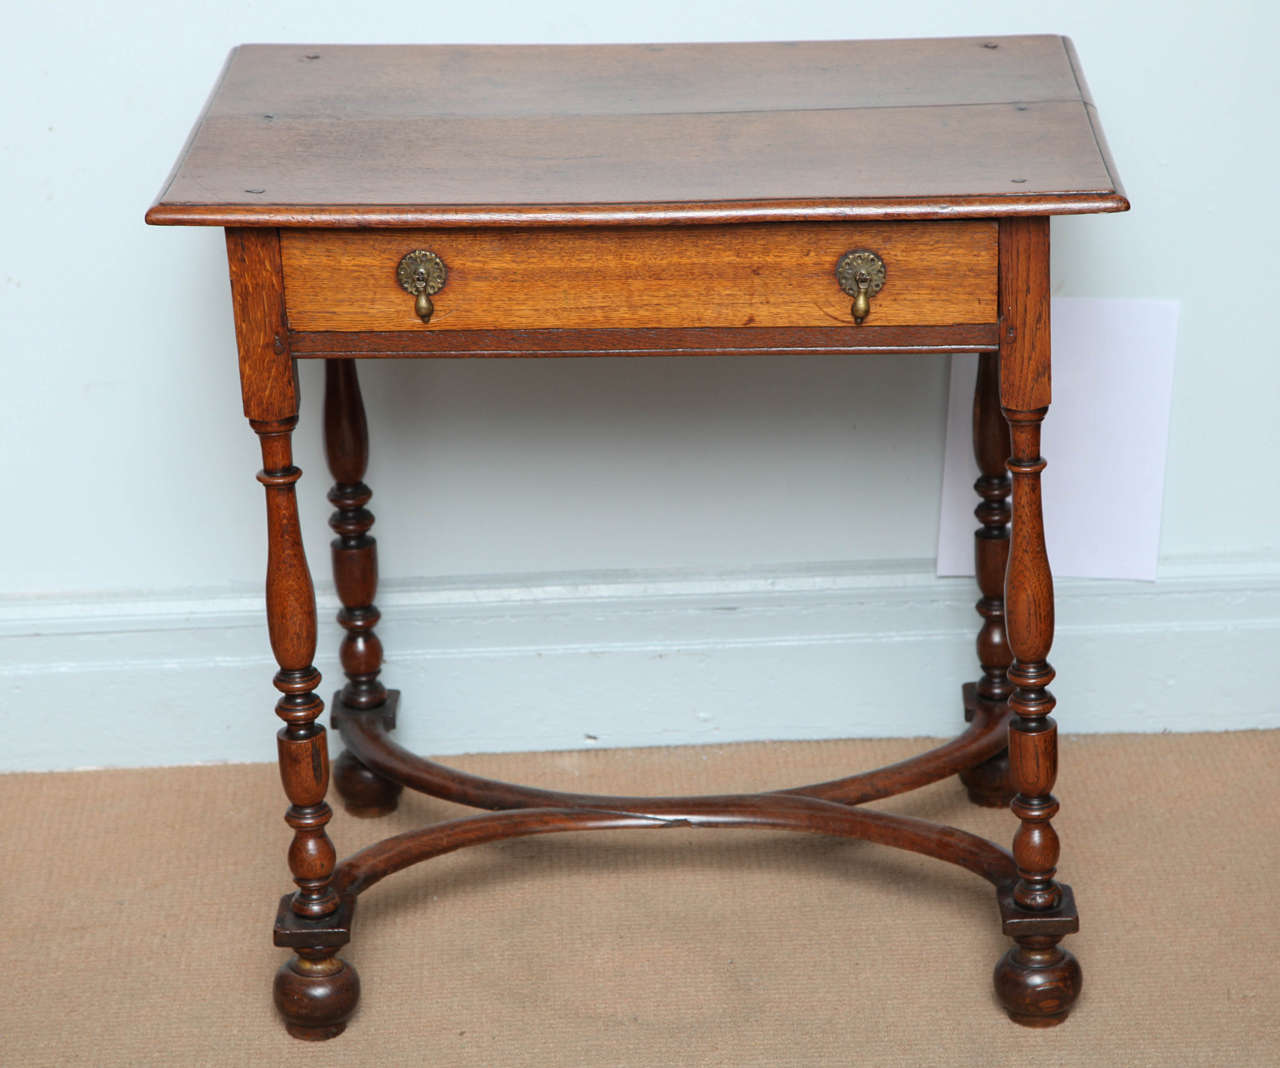 Lovely early 18th century English William and Mary period oak side table, the thumb molded top over single drawer, standing on balustrade turned legs joined by curved 